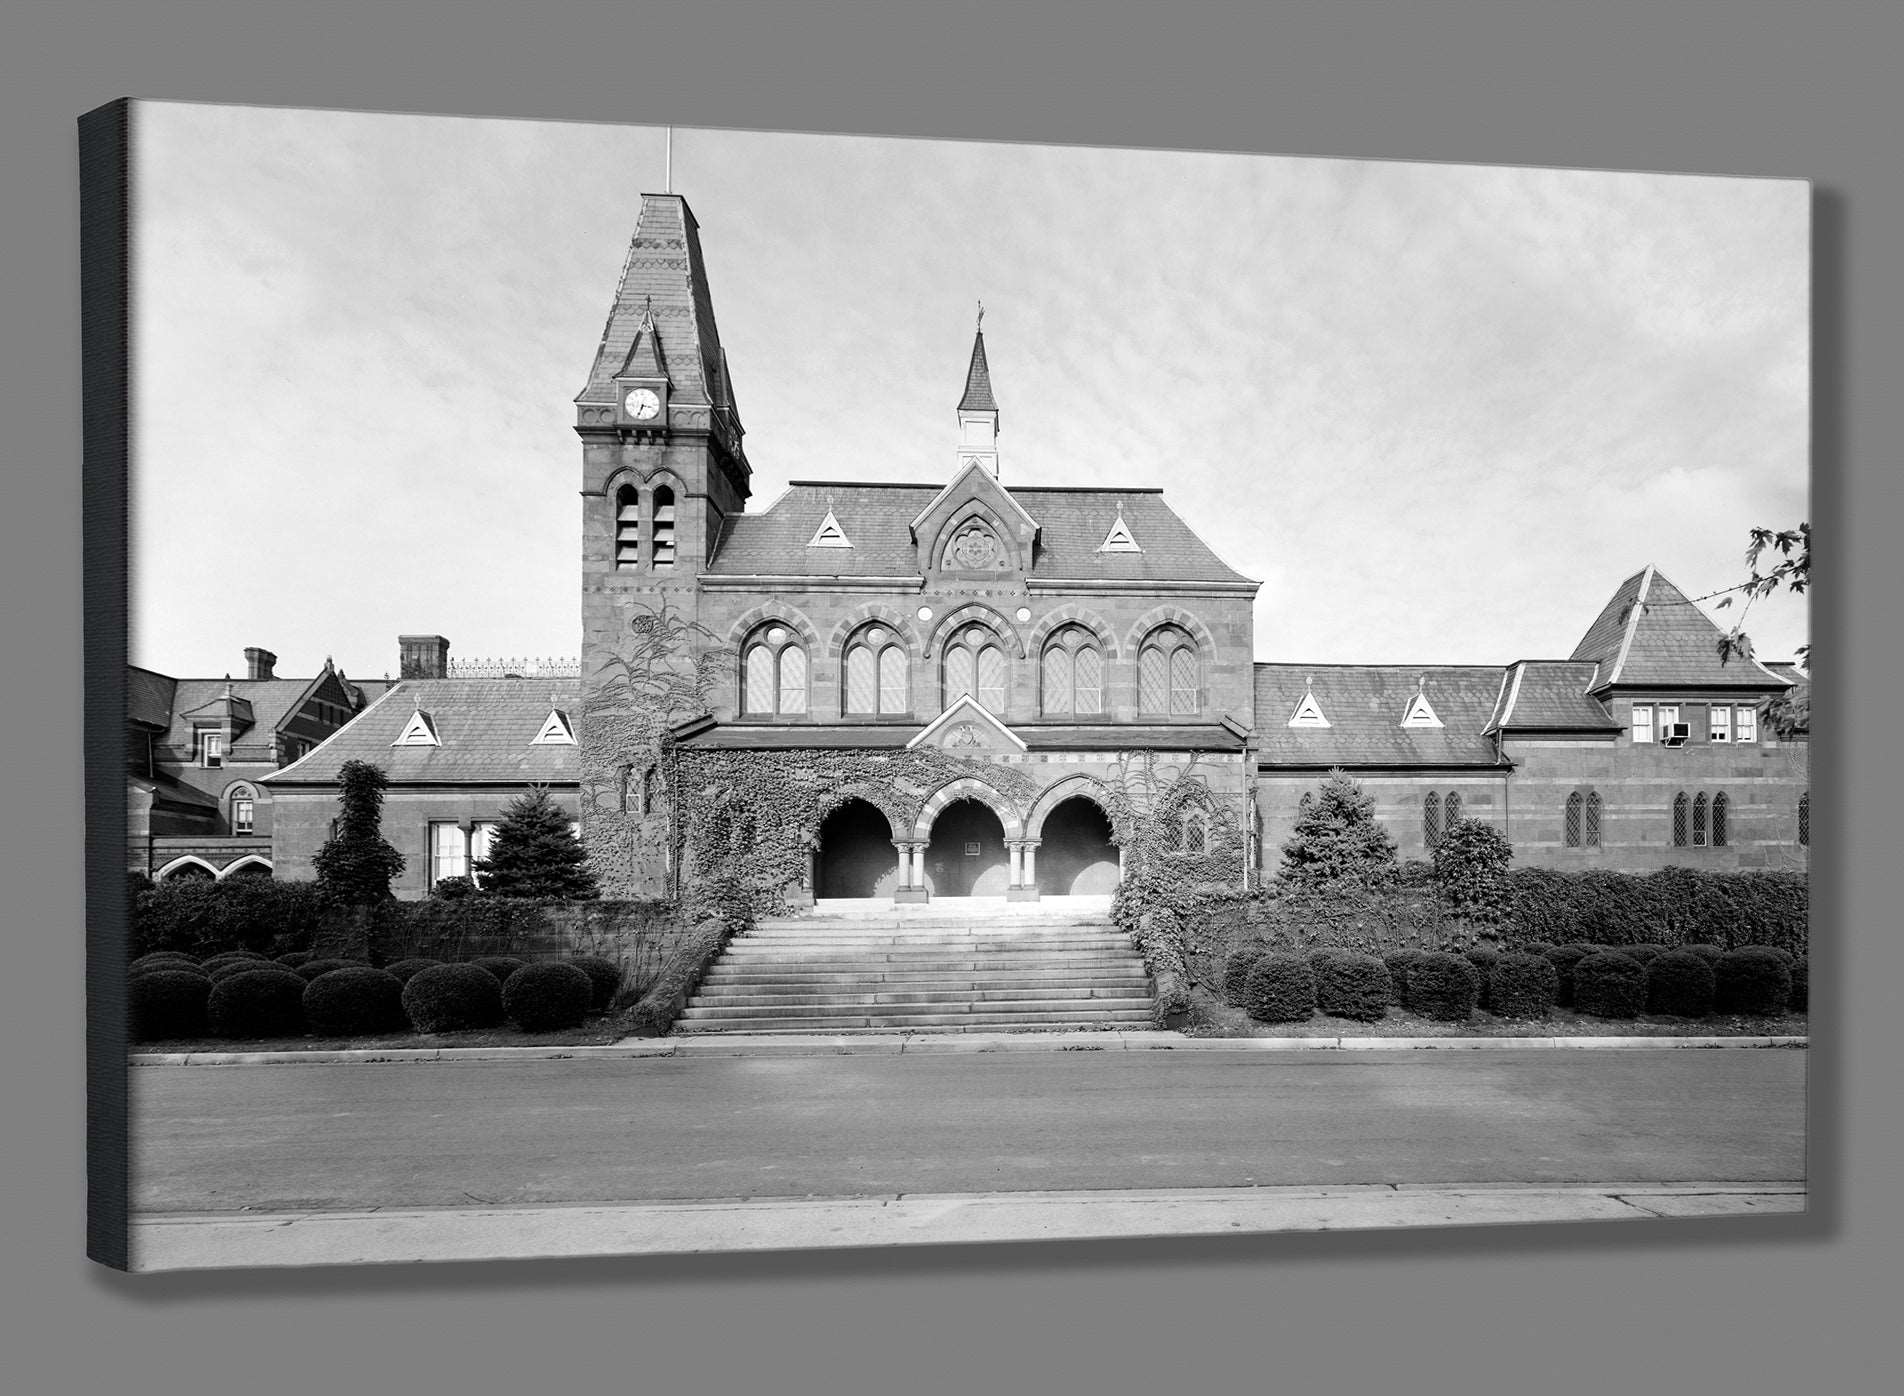 A mockup of a canvas print of a vintage photograph of Gallaudet's Chapel Hall